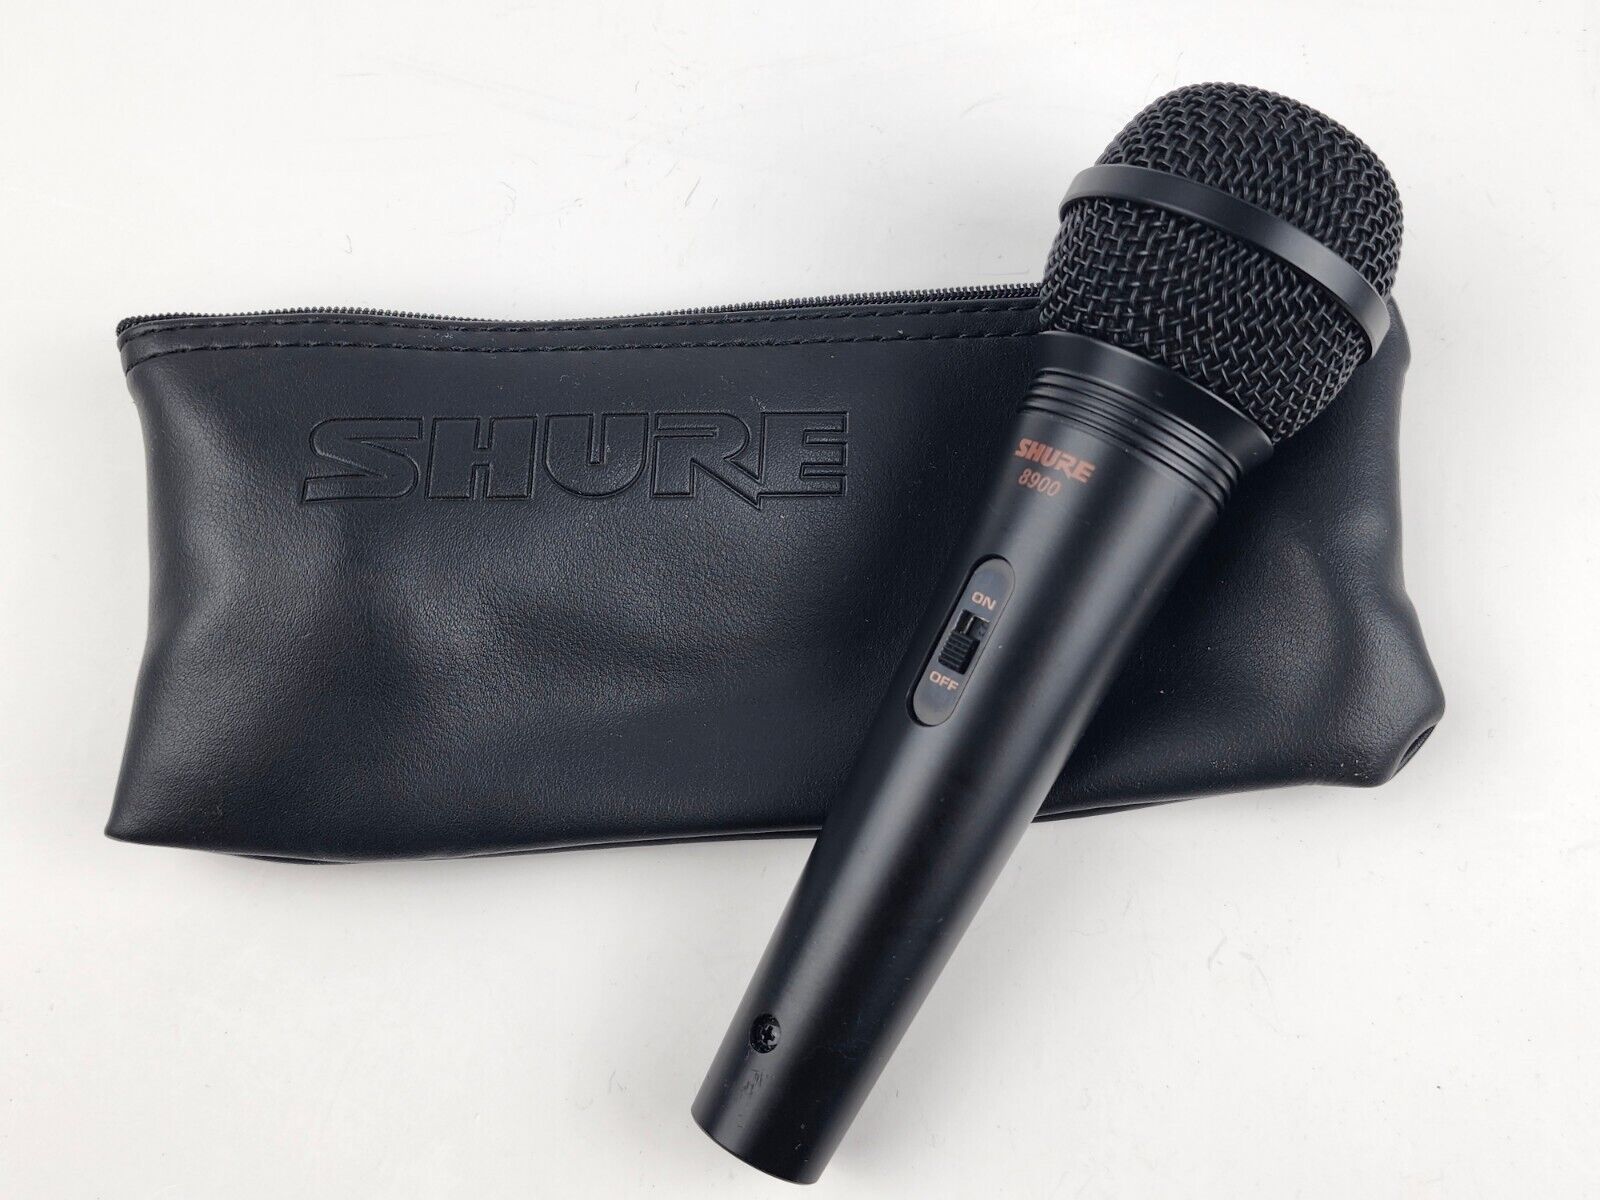 Primary image for Shure 8900 Dynamic Microphone Tested & Working w/ OEM Bag Needs Cord Black